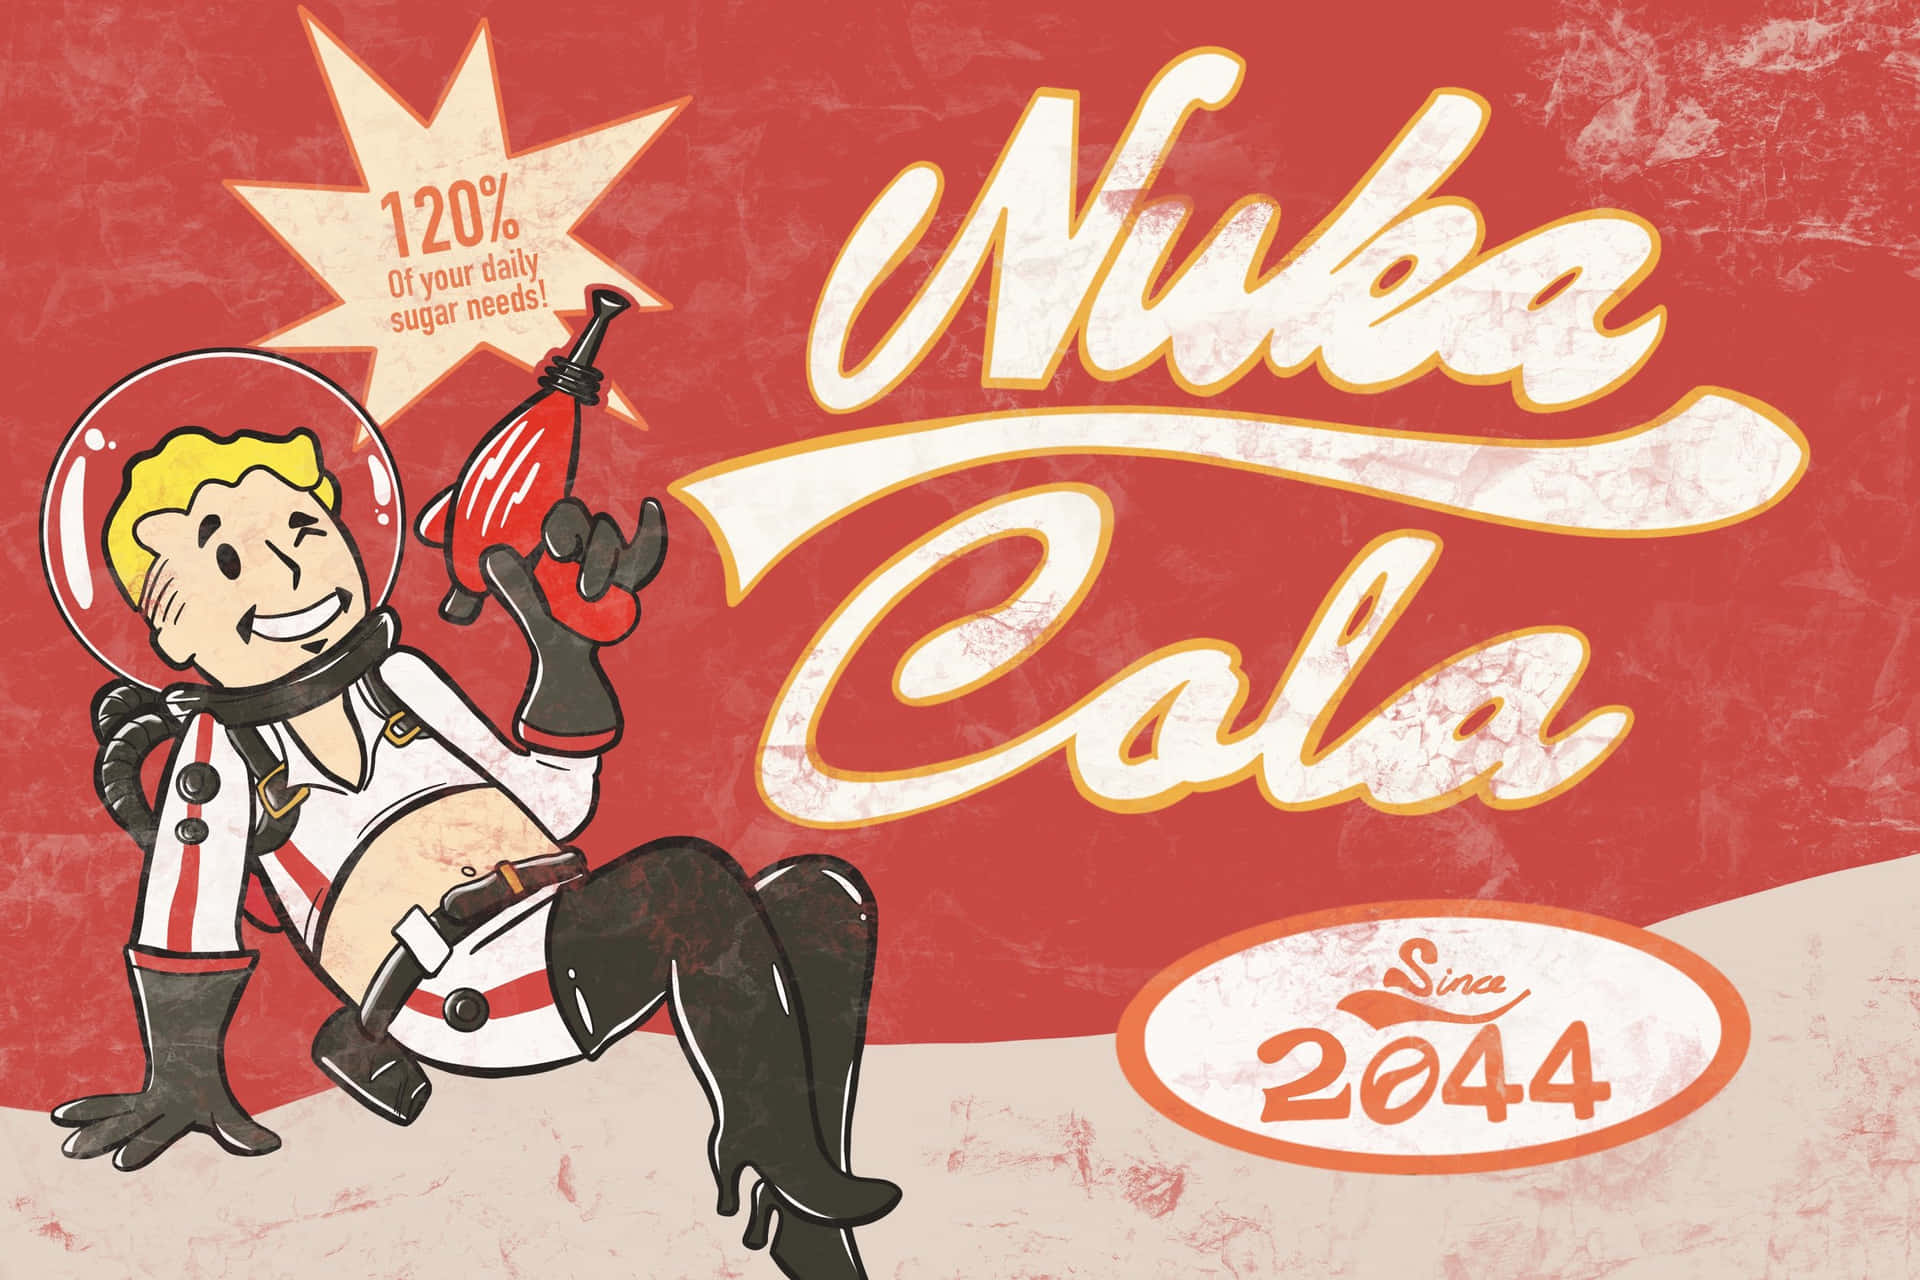 Nuka Cola - A Retro Styled Poster Wallpaper